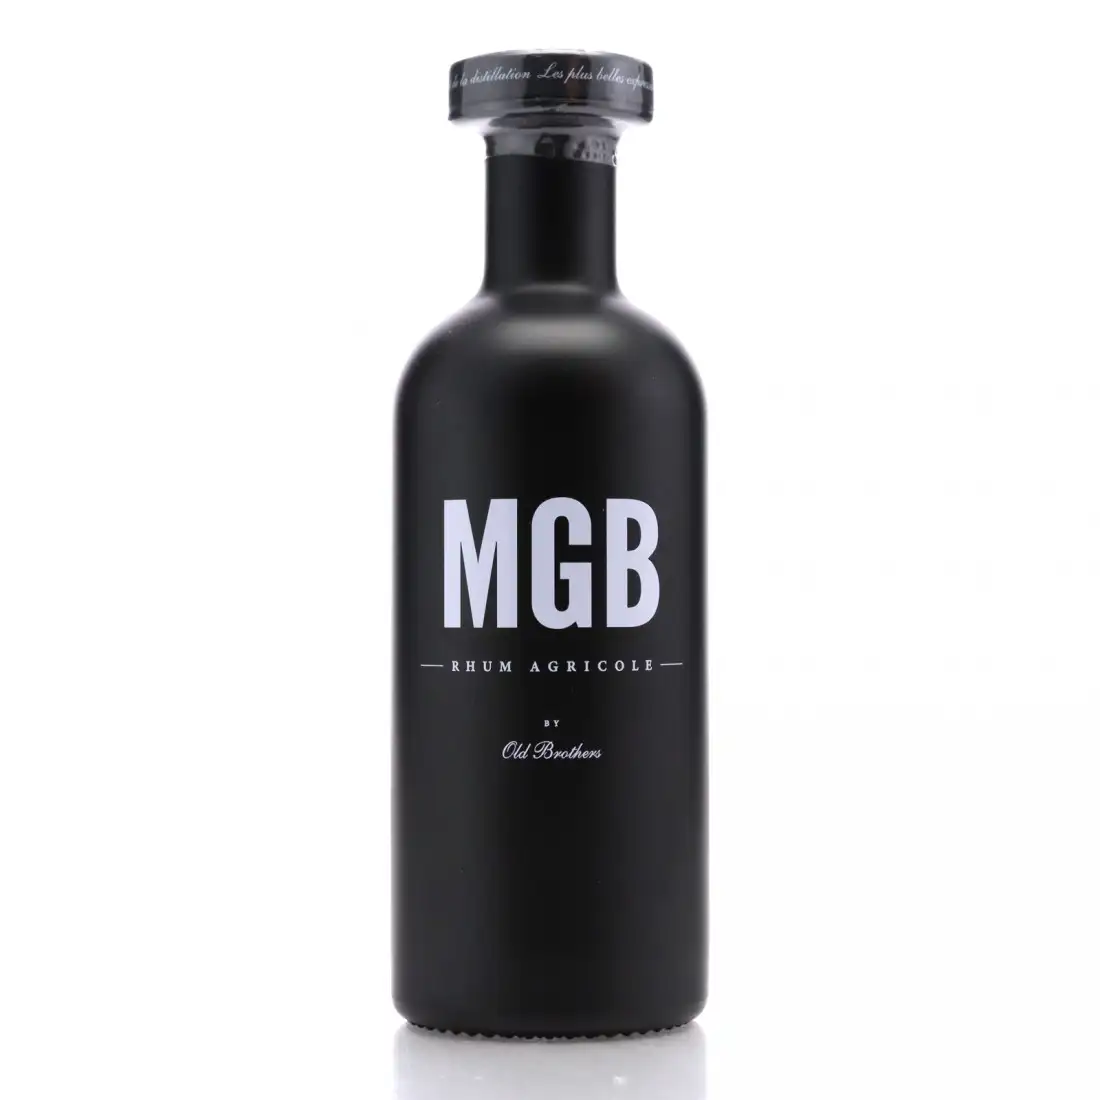 Image of the front of the bottle of the rum MGB